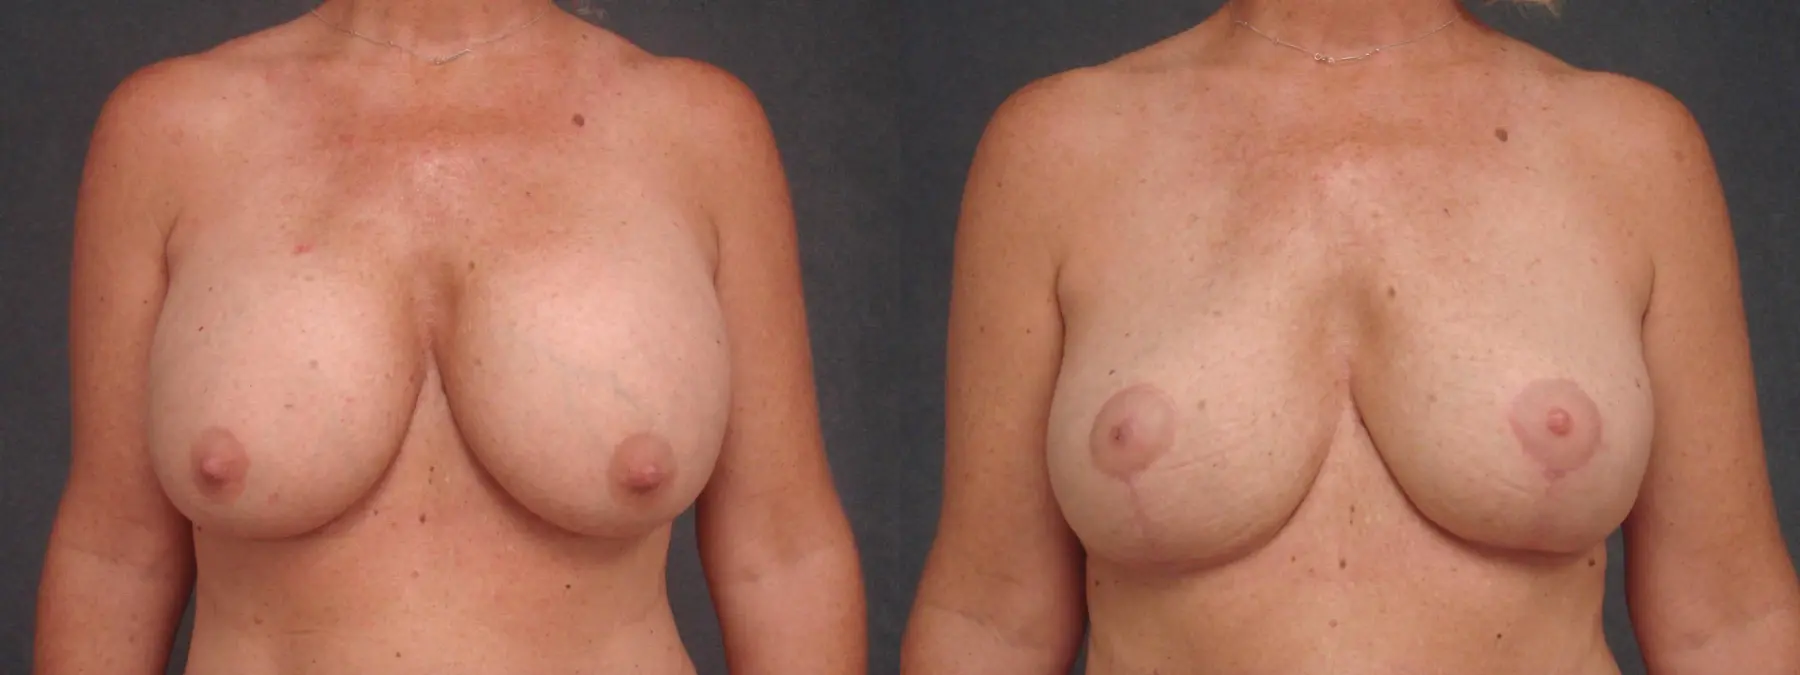 Breast Implant Removal With Lift: Patient 2 - Before and After  